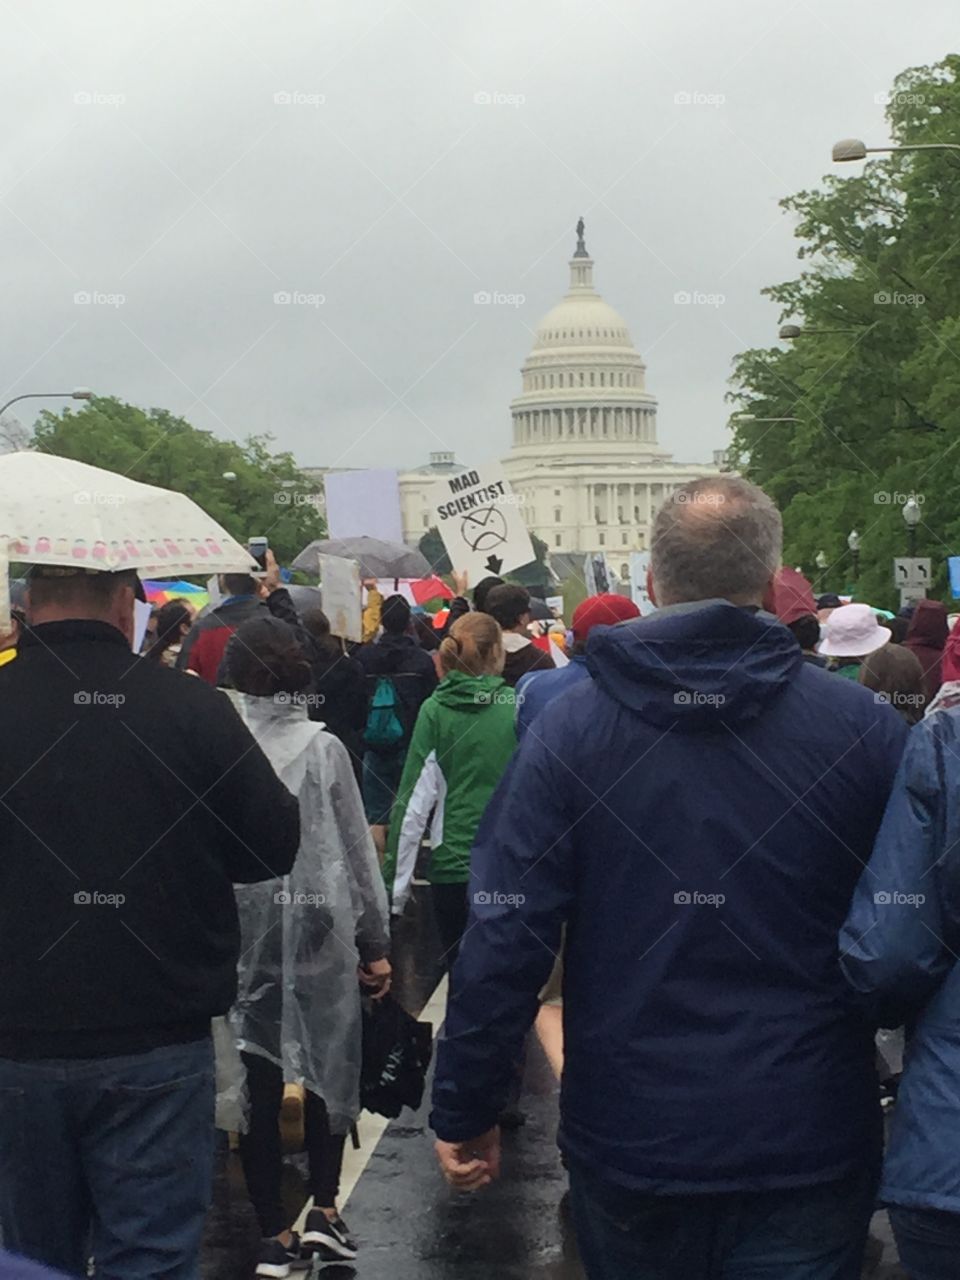 March for Science, US Capitol Building, Washington DC